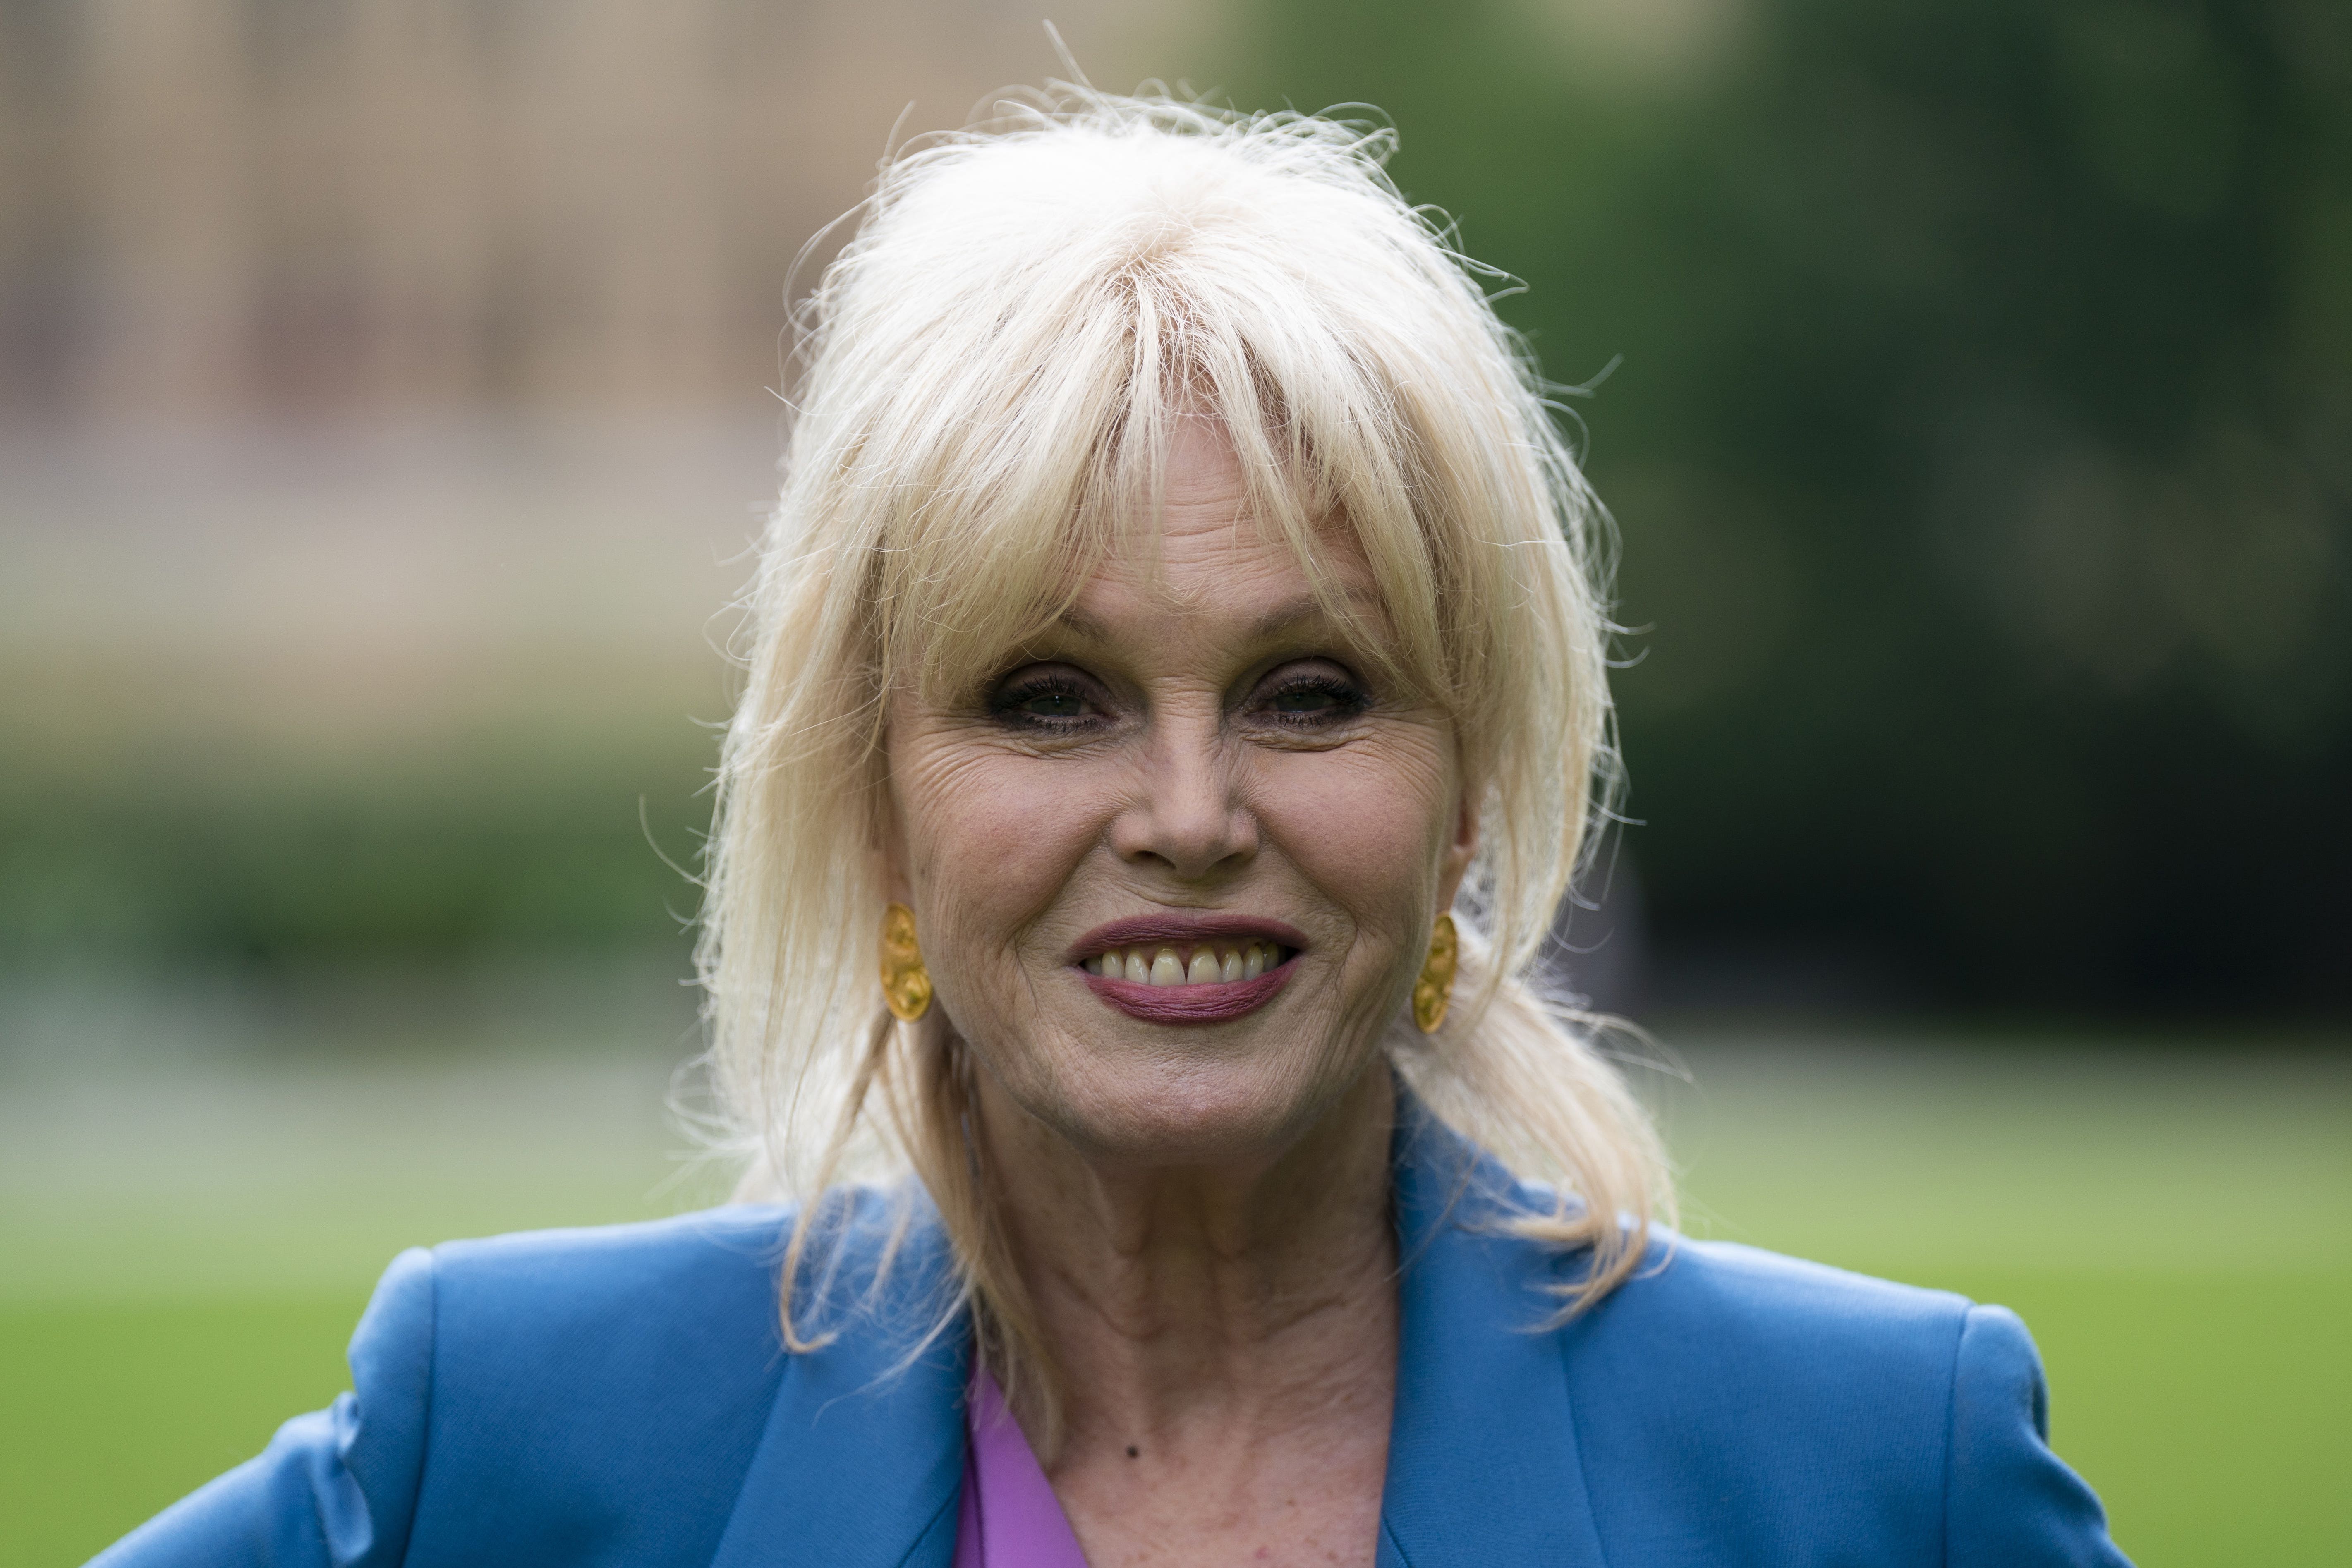 Dame Joanna Lumley will be attending the King’s coronation ceremony on 6 May